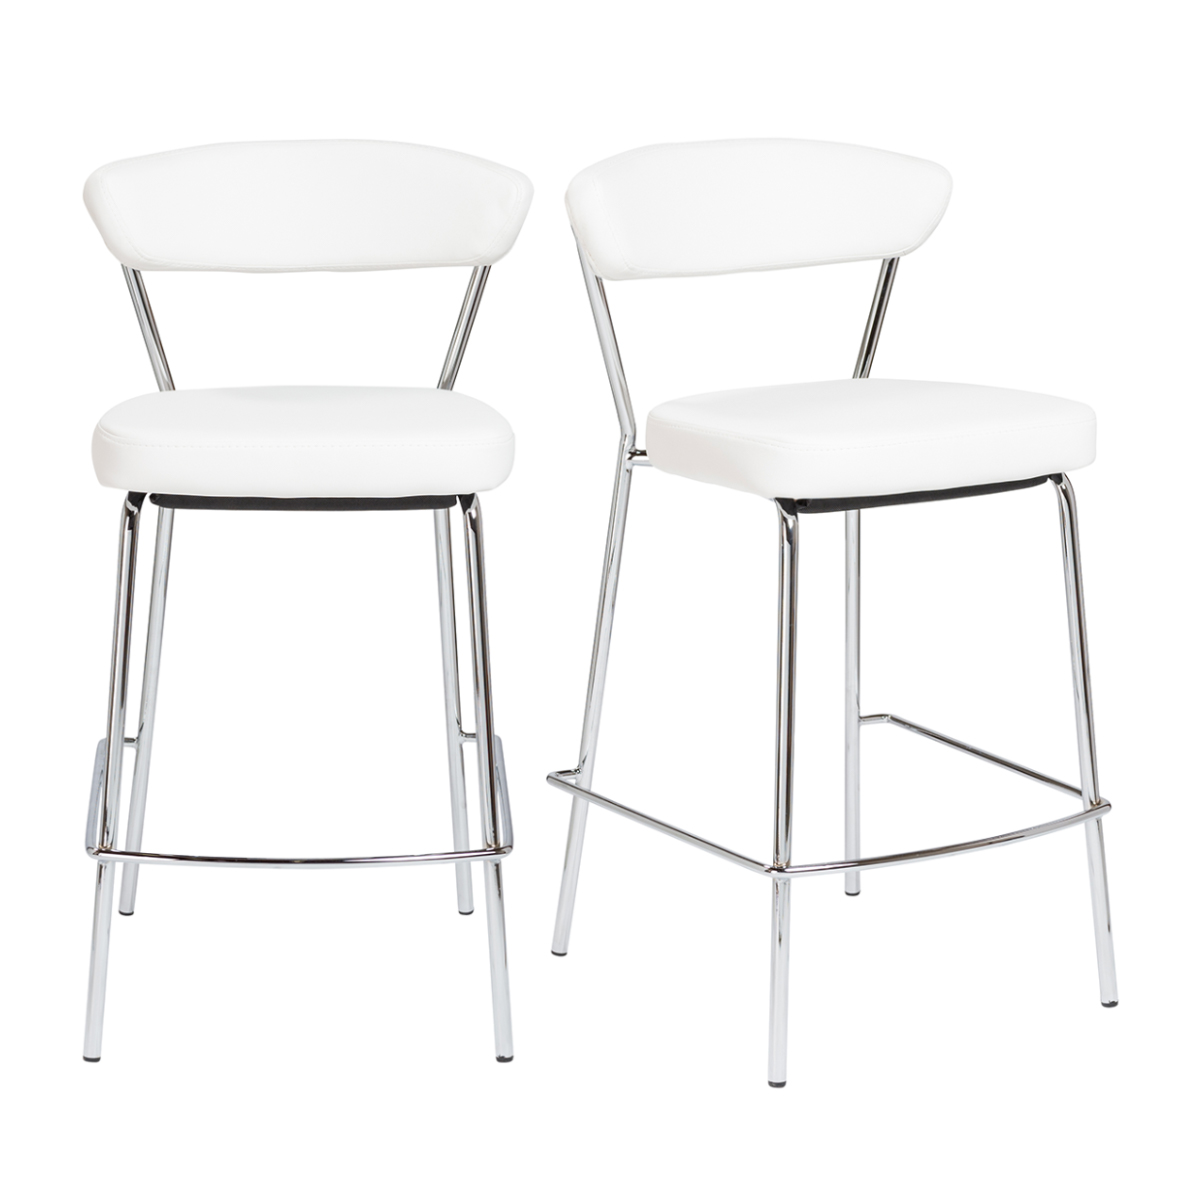 Two Draco Cunter Stool in white soft leatherette over foam seat and back, and chromed steel frame and base shown here.